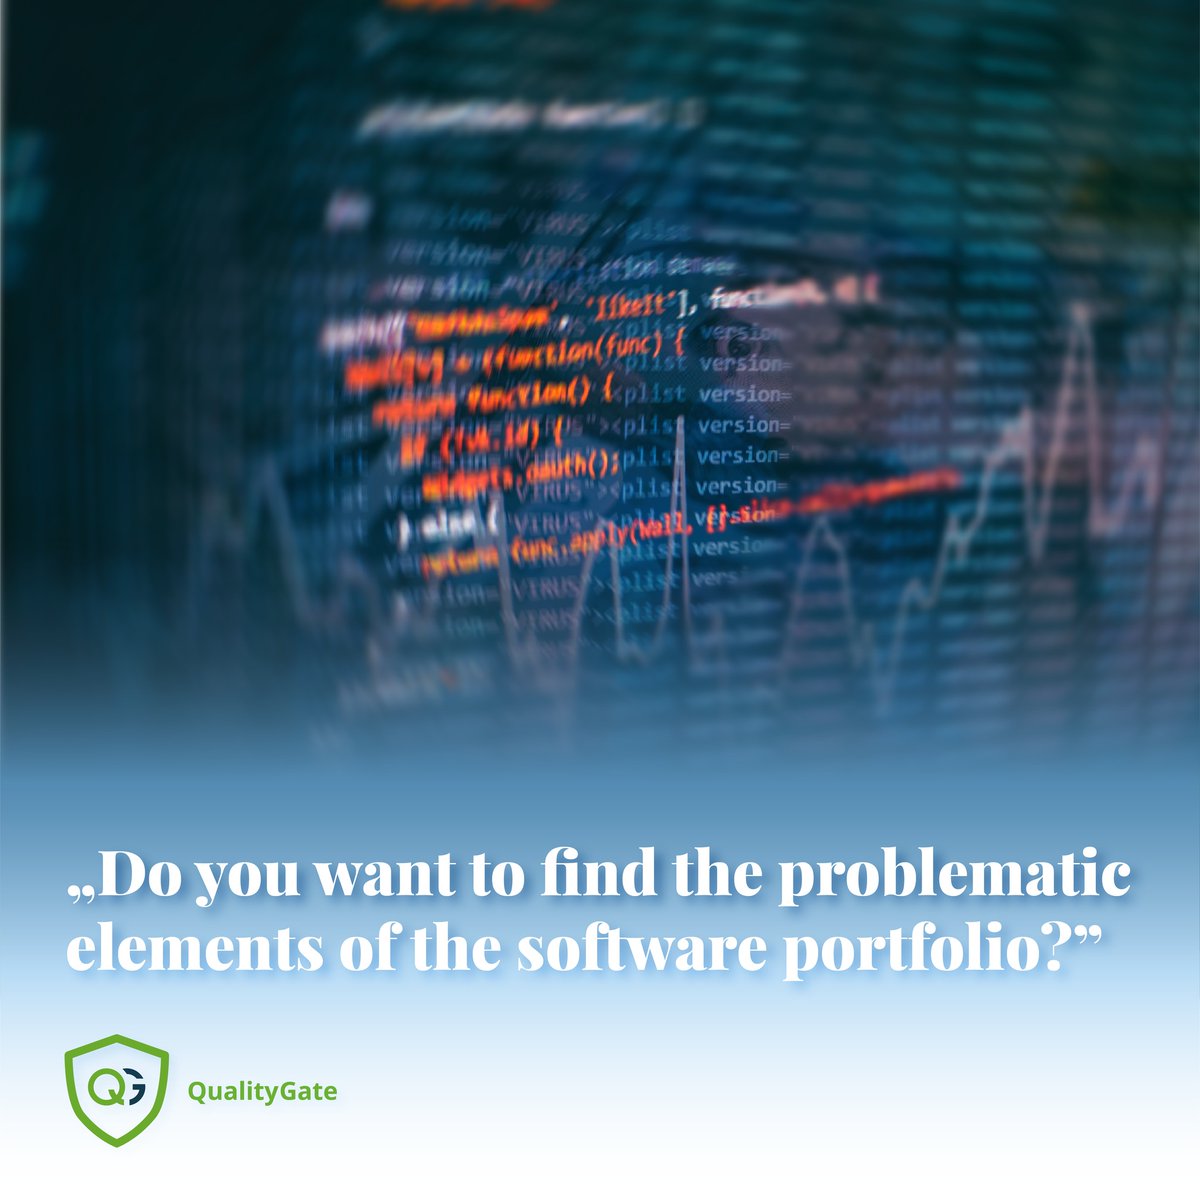 Do you want to find the problematic elements of the software portfolio?

More information: quality-gate.com/dashboard

#sqa #staticcodeanalysis #opensourcecode #softwarequality #softwarequalityassurance #javaprogramming #javaprogrammer  #pythonprogrammer #pythonprogramming